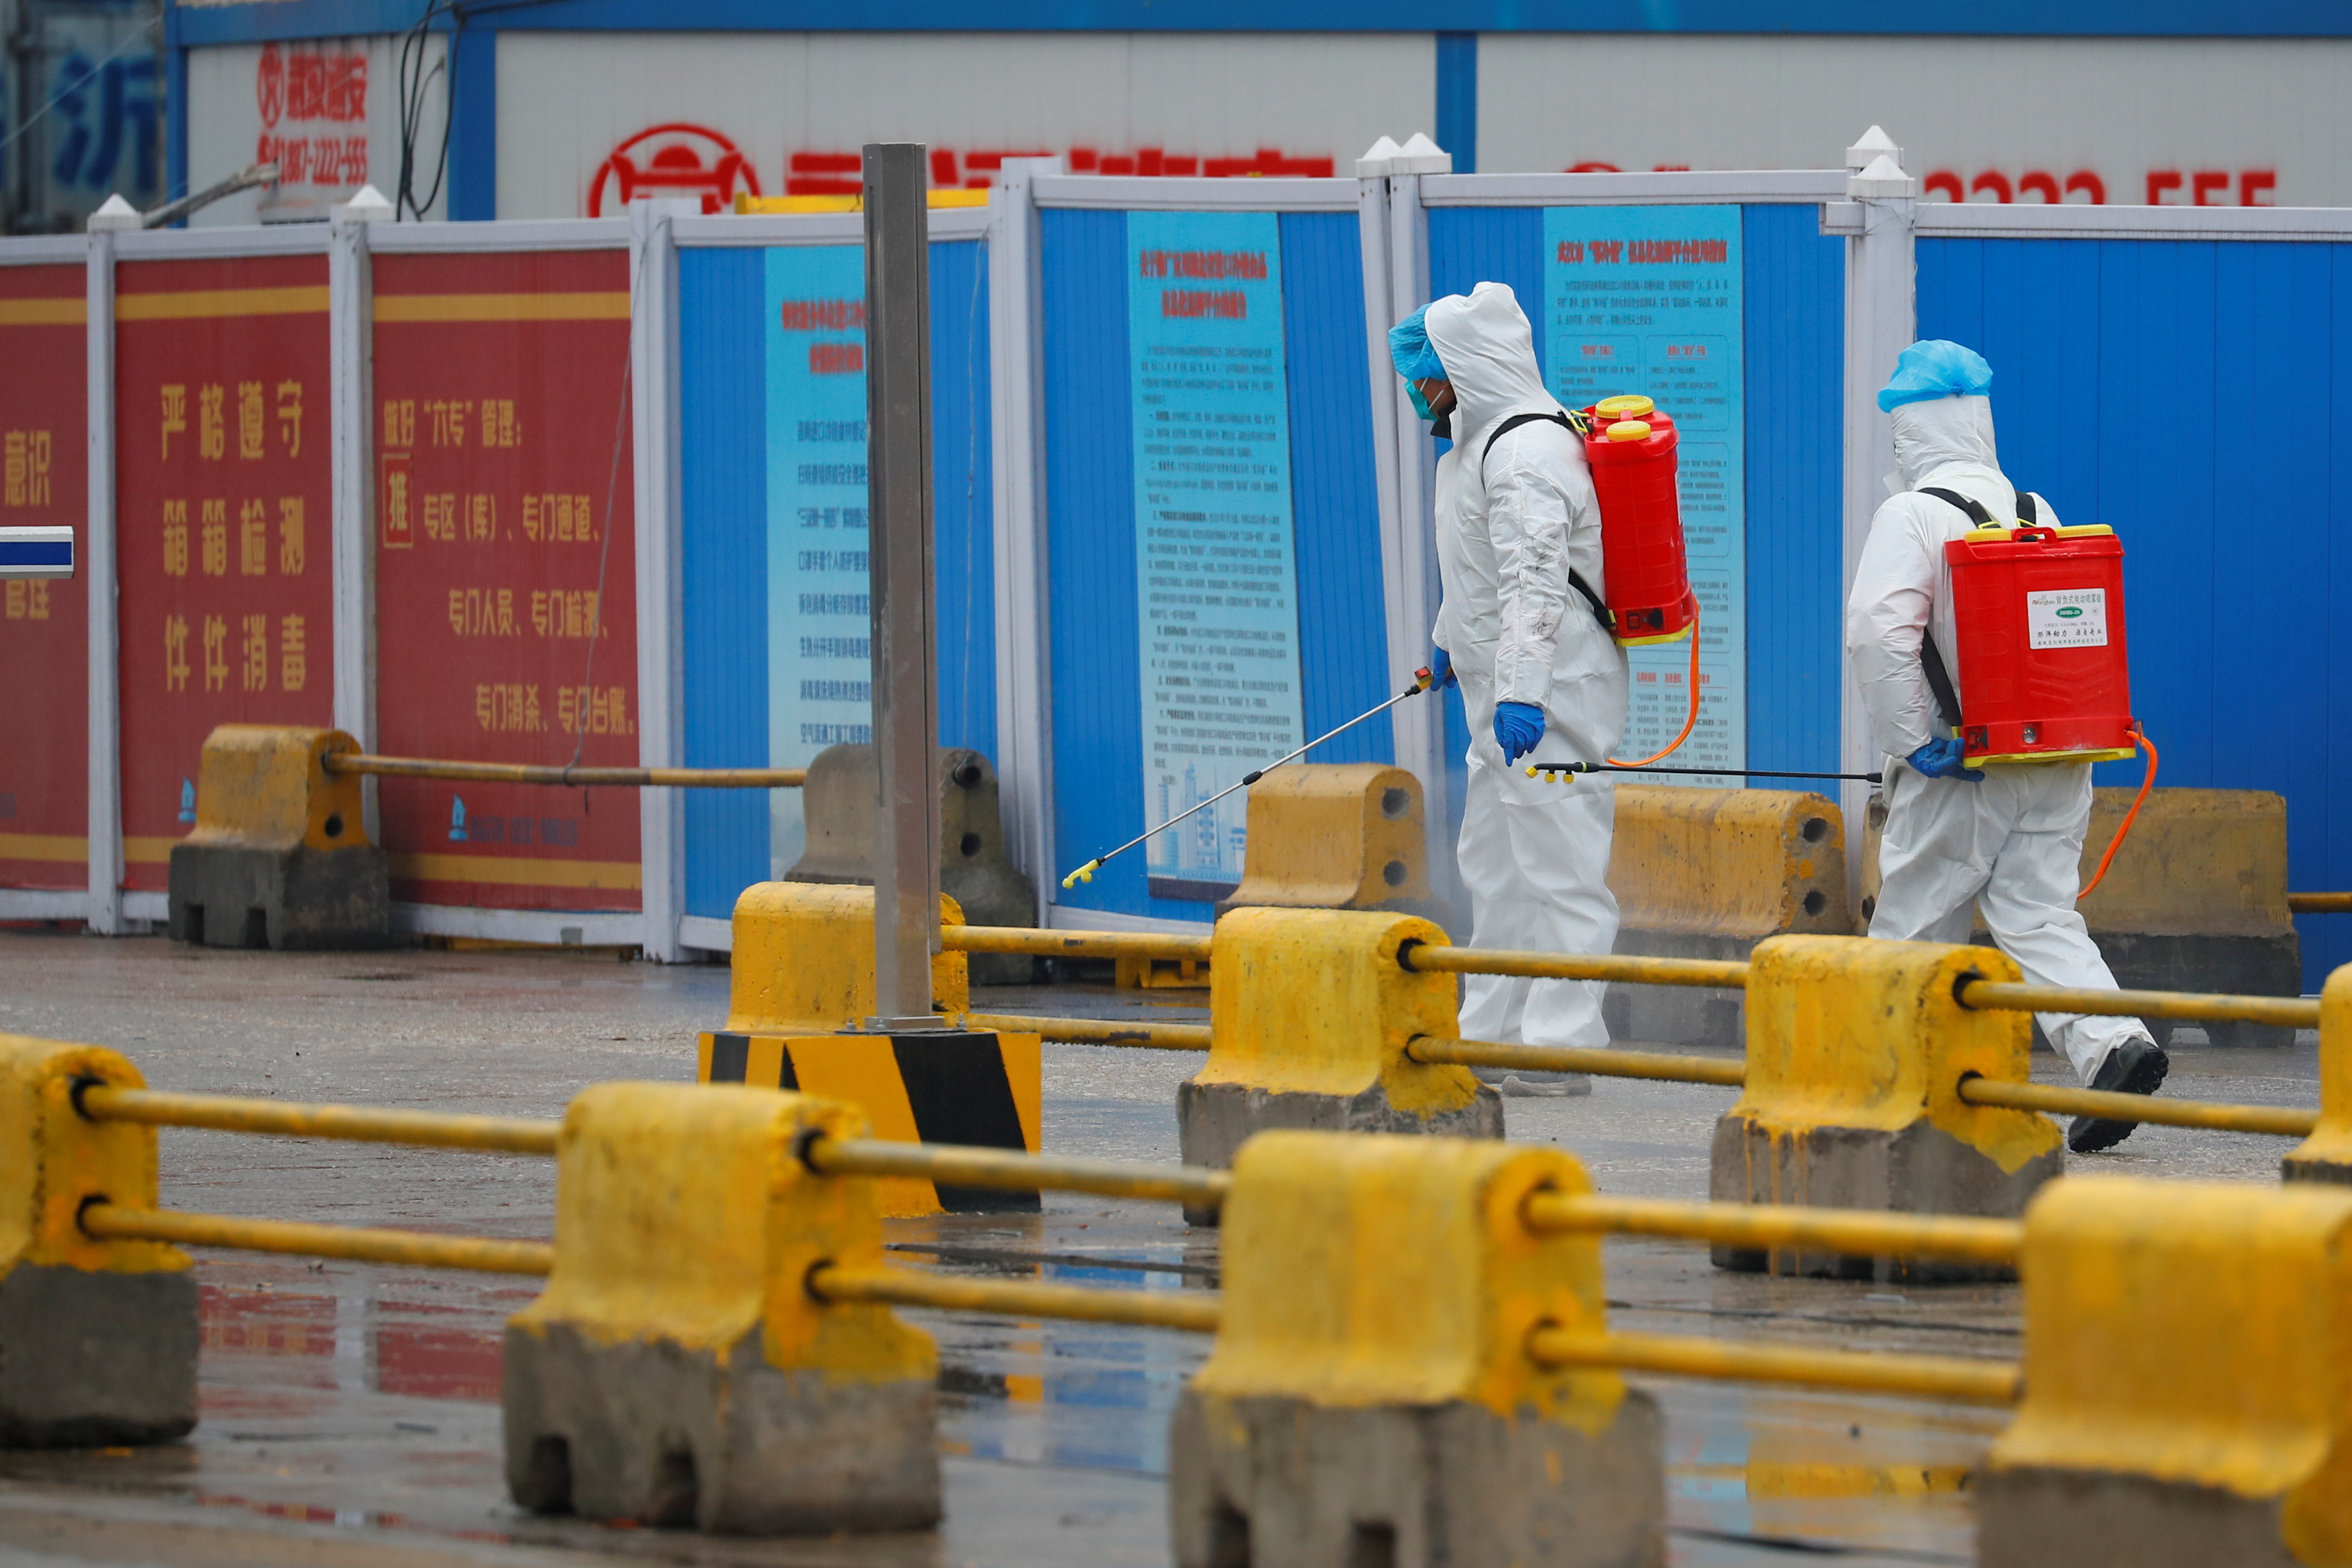 Workers in PPE spray the ground with diinfectant in Baishazhou market during a visit of World Health Organization (WHO) team tasked with investigating the origins of the coronavirus (COVID-19) pandemic, in Wuhan